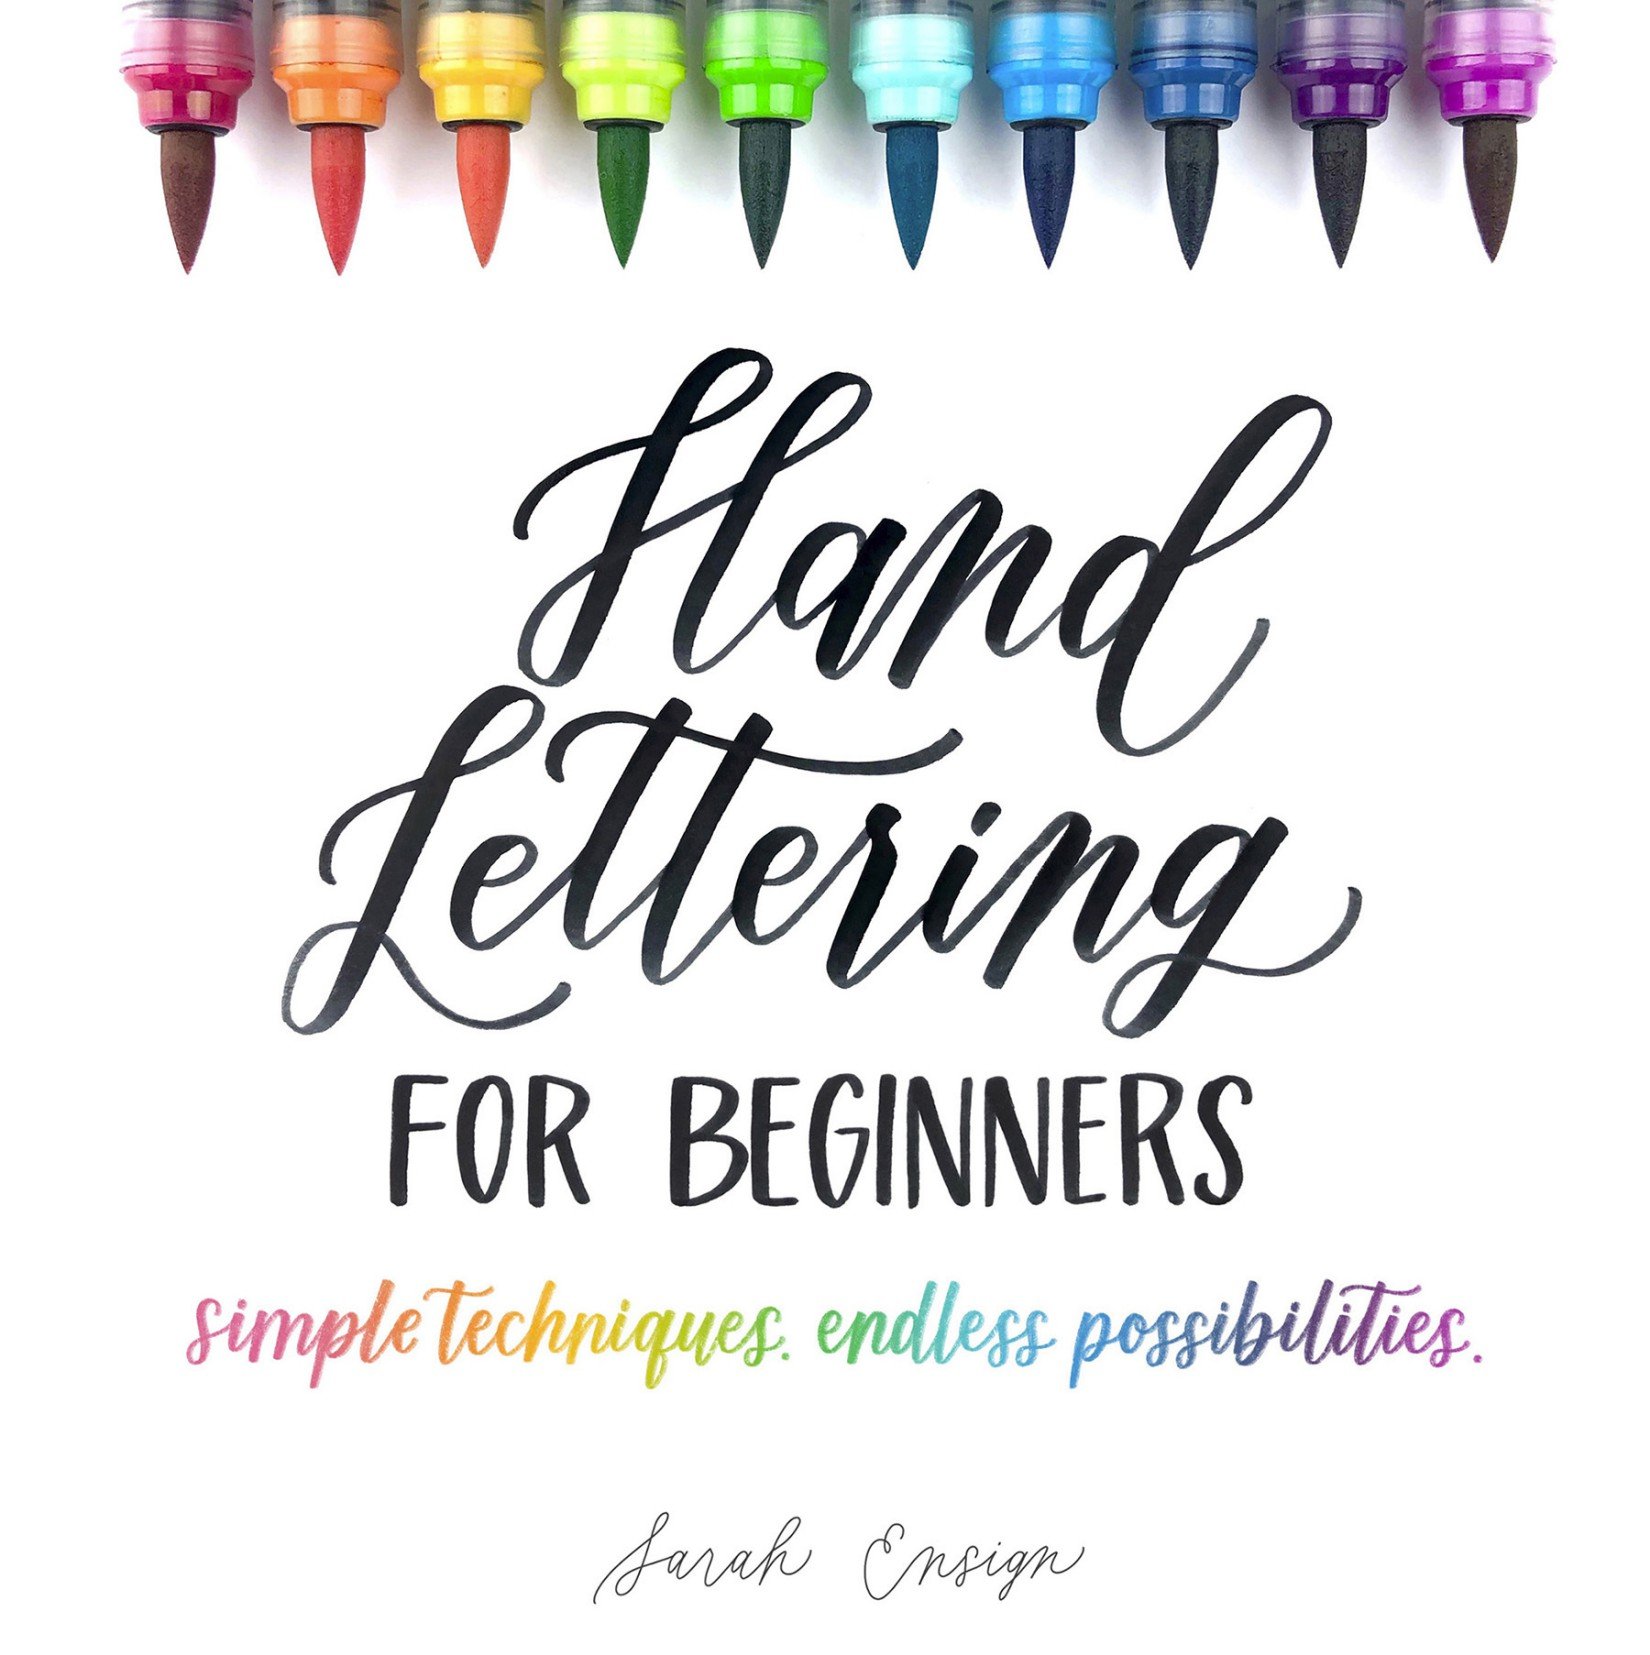 download-hand-lettering-for-beginners-simple-techniques-endless-possibilities-softarchive